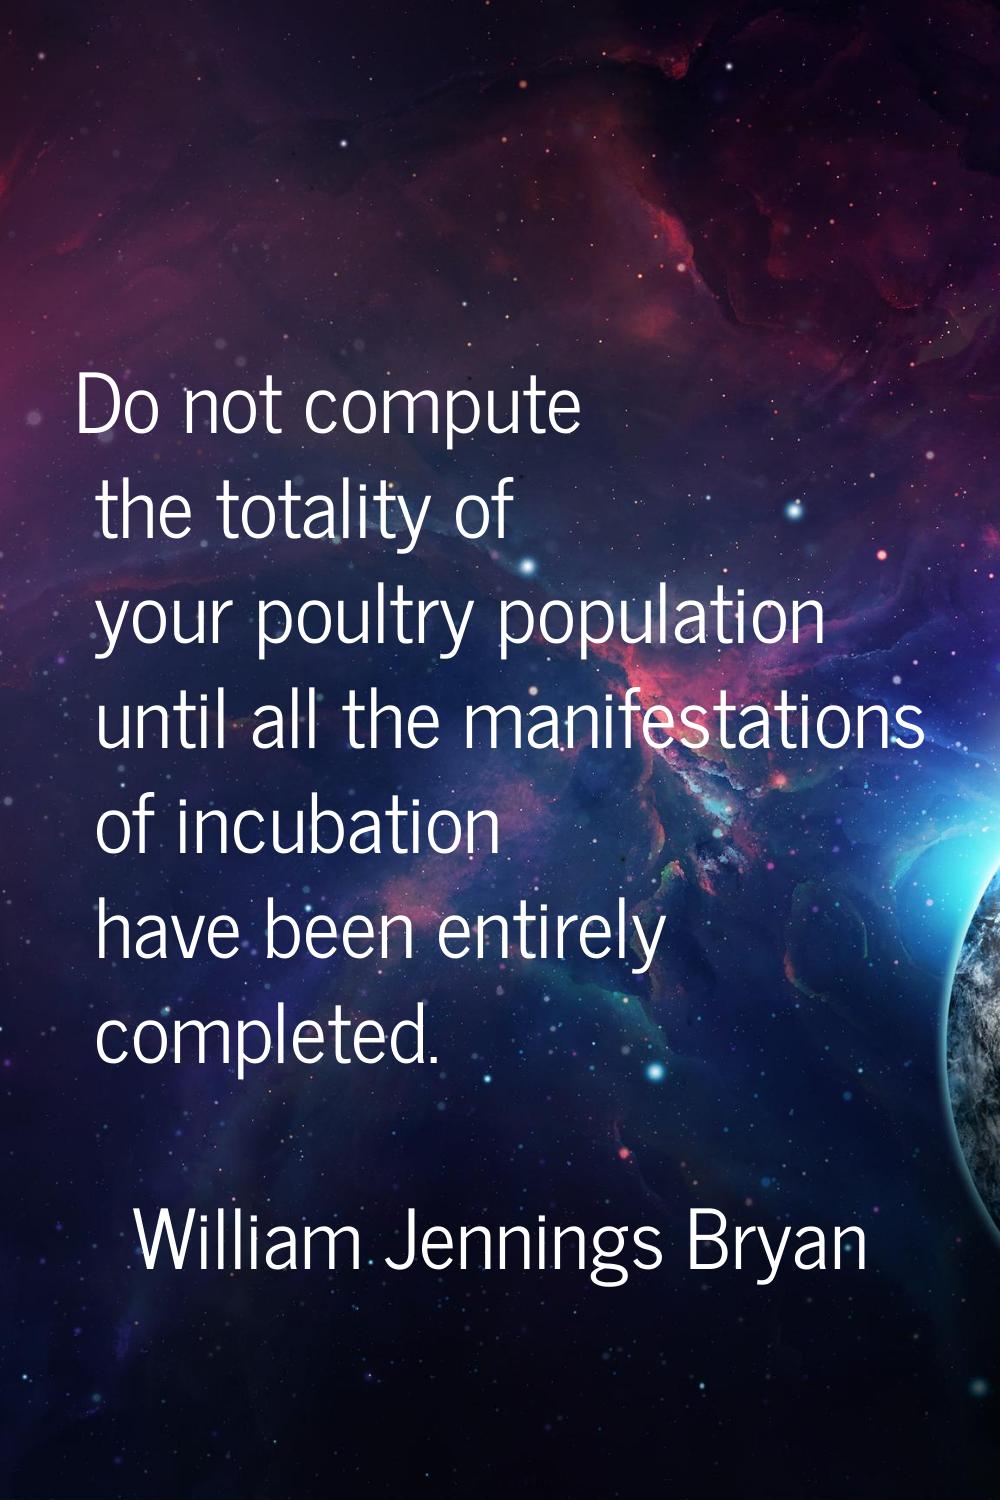 Do not compute the totality of your poultry population until all the manifestations of incubation h